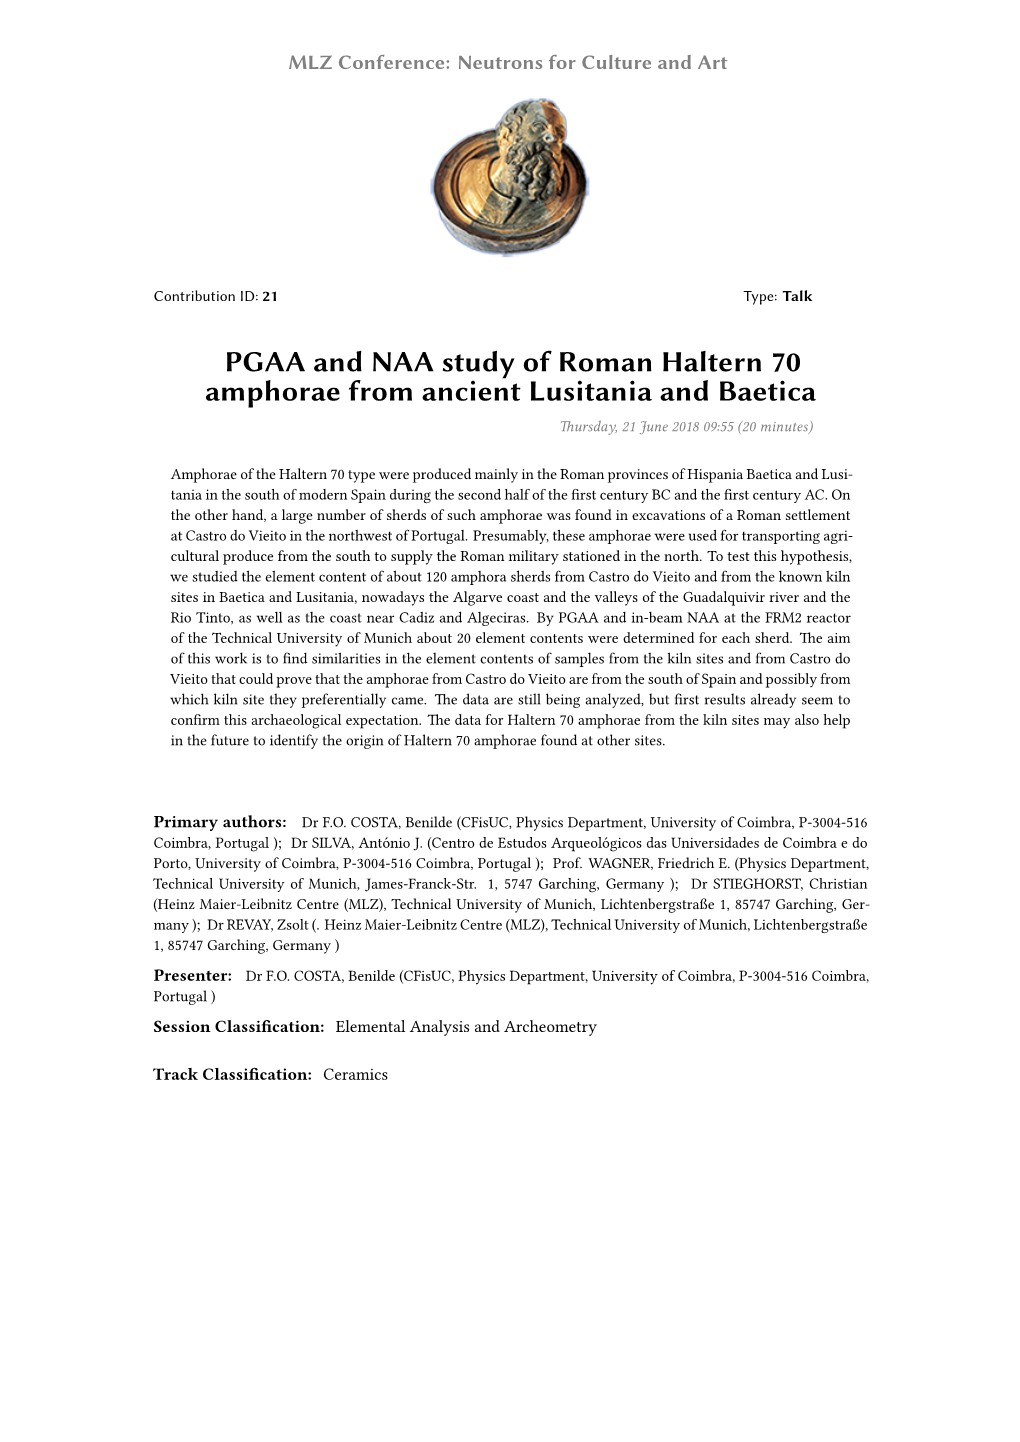 PGAA and NAA Study of Roman Haltern 70 Amphorae from Ancient Lusitania and Baetica Thursday, 21 June 2018 09:55 (20 Minutes)